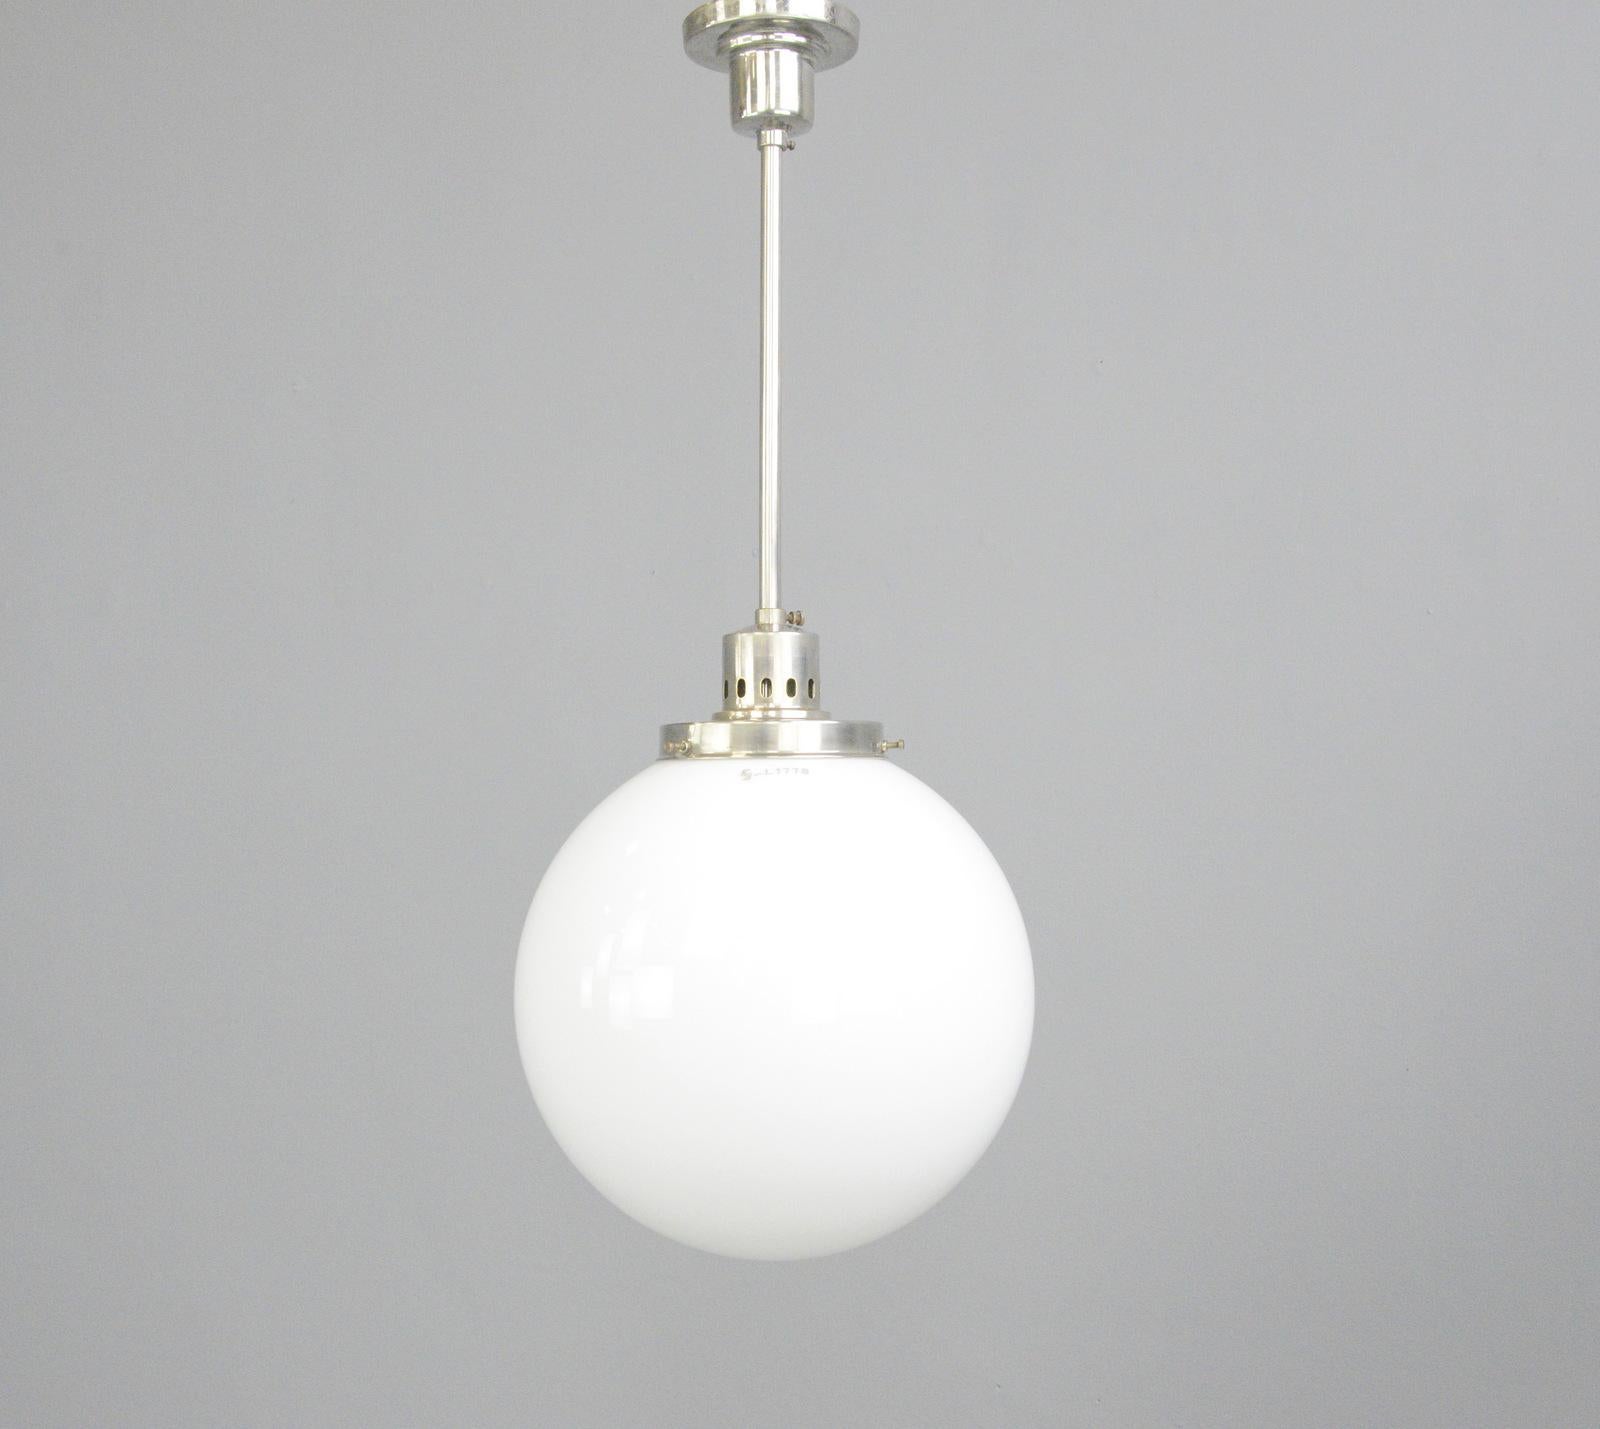 Bauhaus globe pendant light by Siemens, circa 1930s

- Opaline glass globe
- Polished nickel gallery and stem
- Takes E27 fitting bulbs
- Model L1778
- Made by Siemens & Schukert
- German ~ 1930s
- Measures: 30cm wide x 35cm tall - 70cm tall